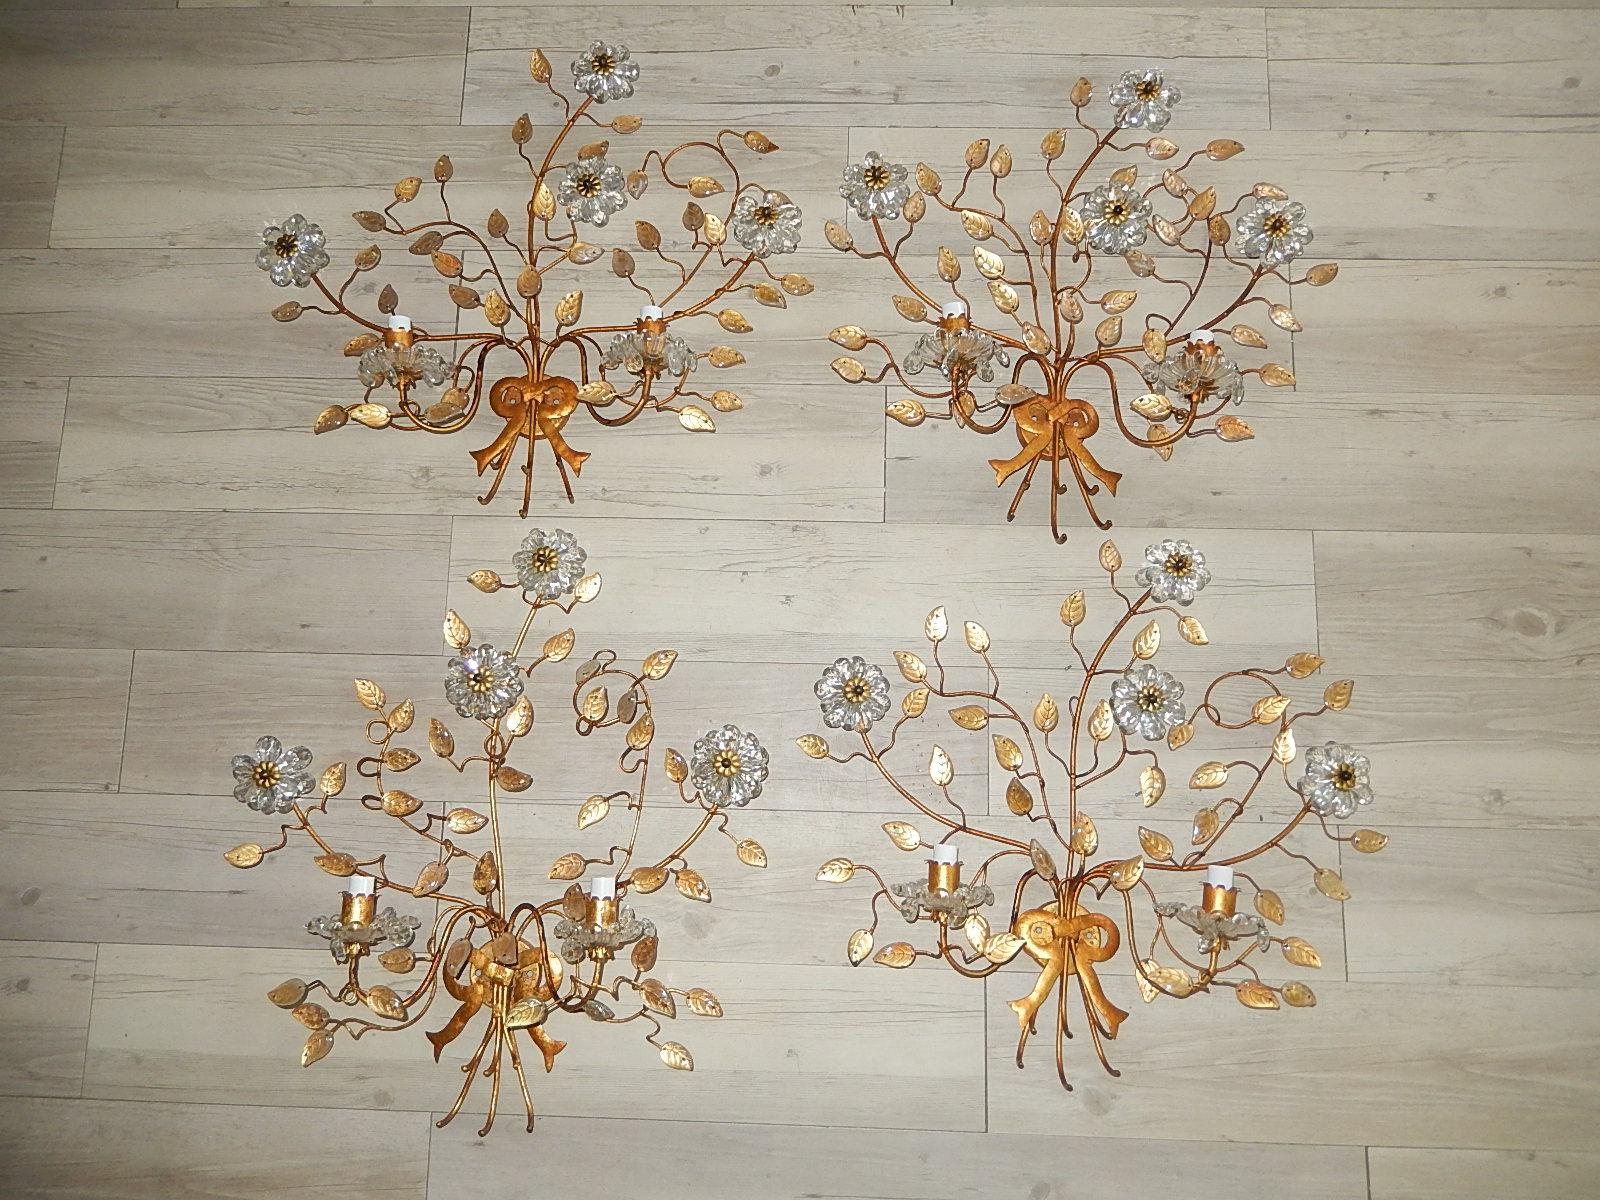 Four Maison Baguès double arm sconces. Rewired and ready to hang. Adorning 4 flowers on each made up of crystal prisms. Crystal bobèche with crystal prisms as well. Glass leaves throughout. Big gold bow on bottom. Free priority shipping from Italy.